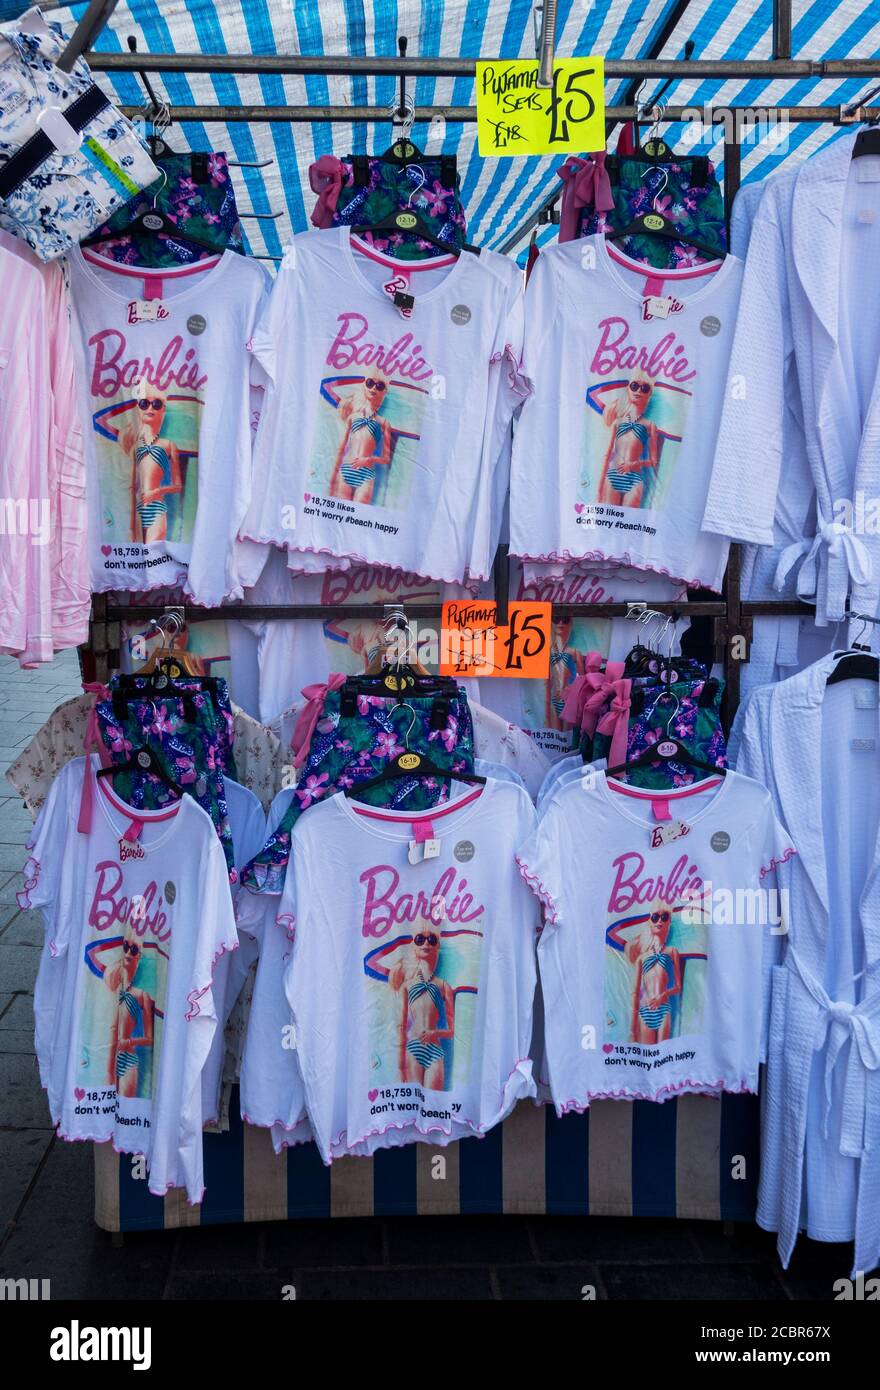 Barbie tee shirts on sale for 5 pounds at a Liverpool Street stand Stock Photo